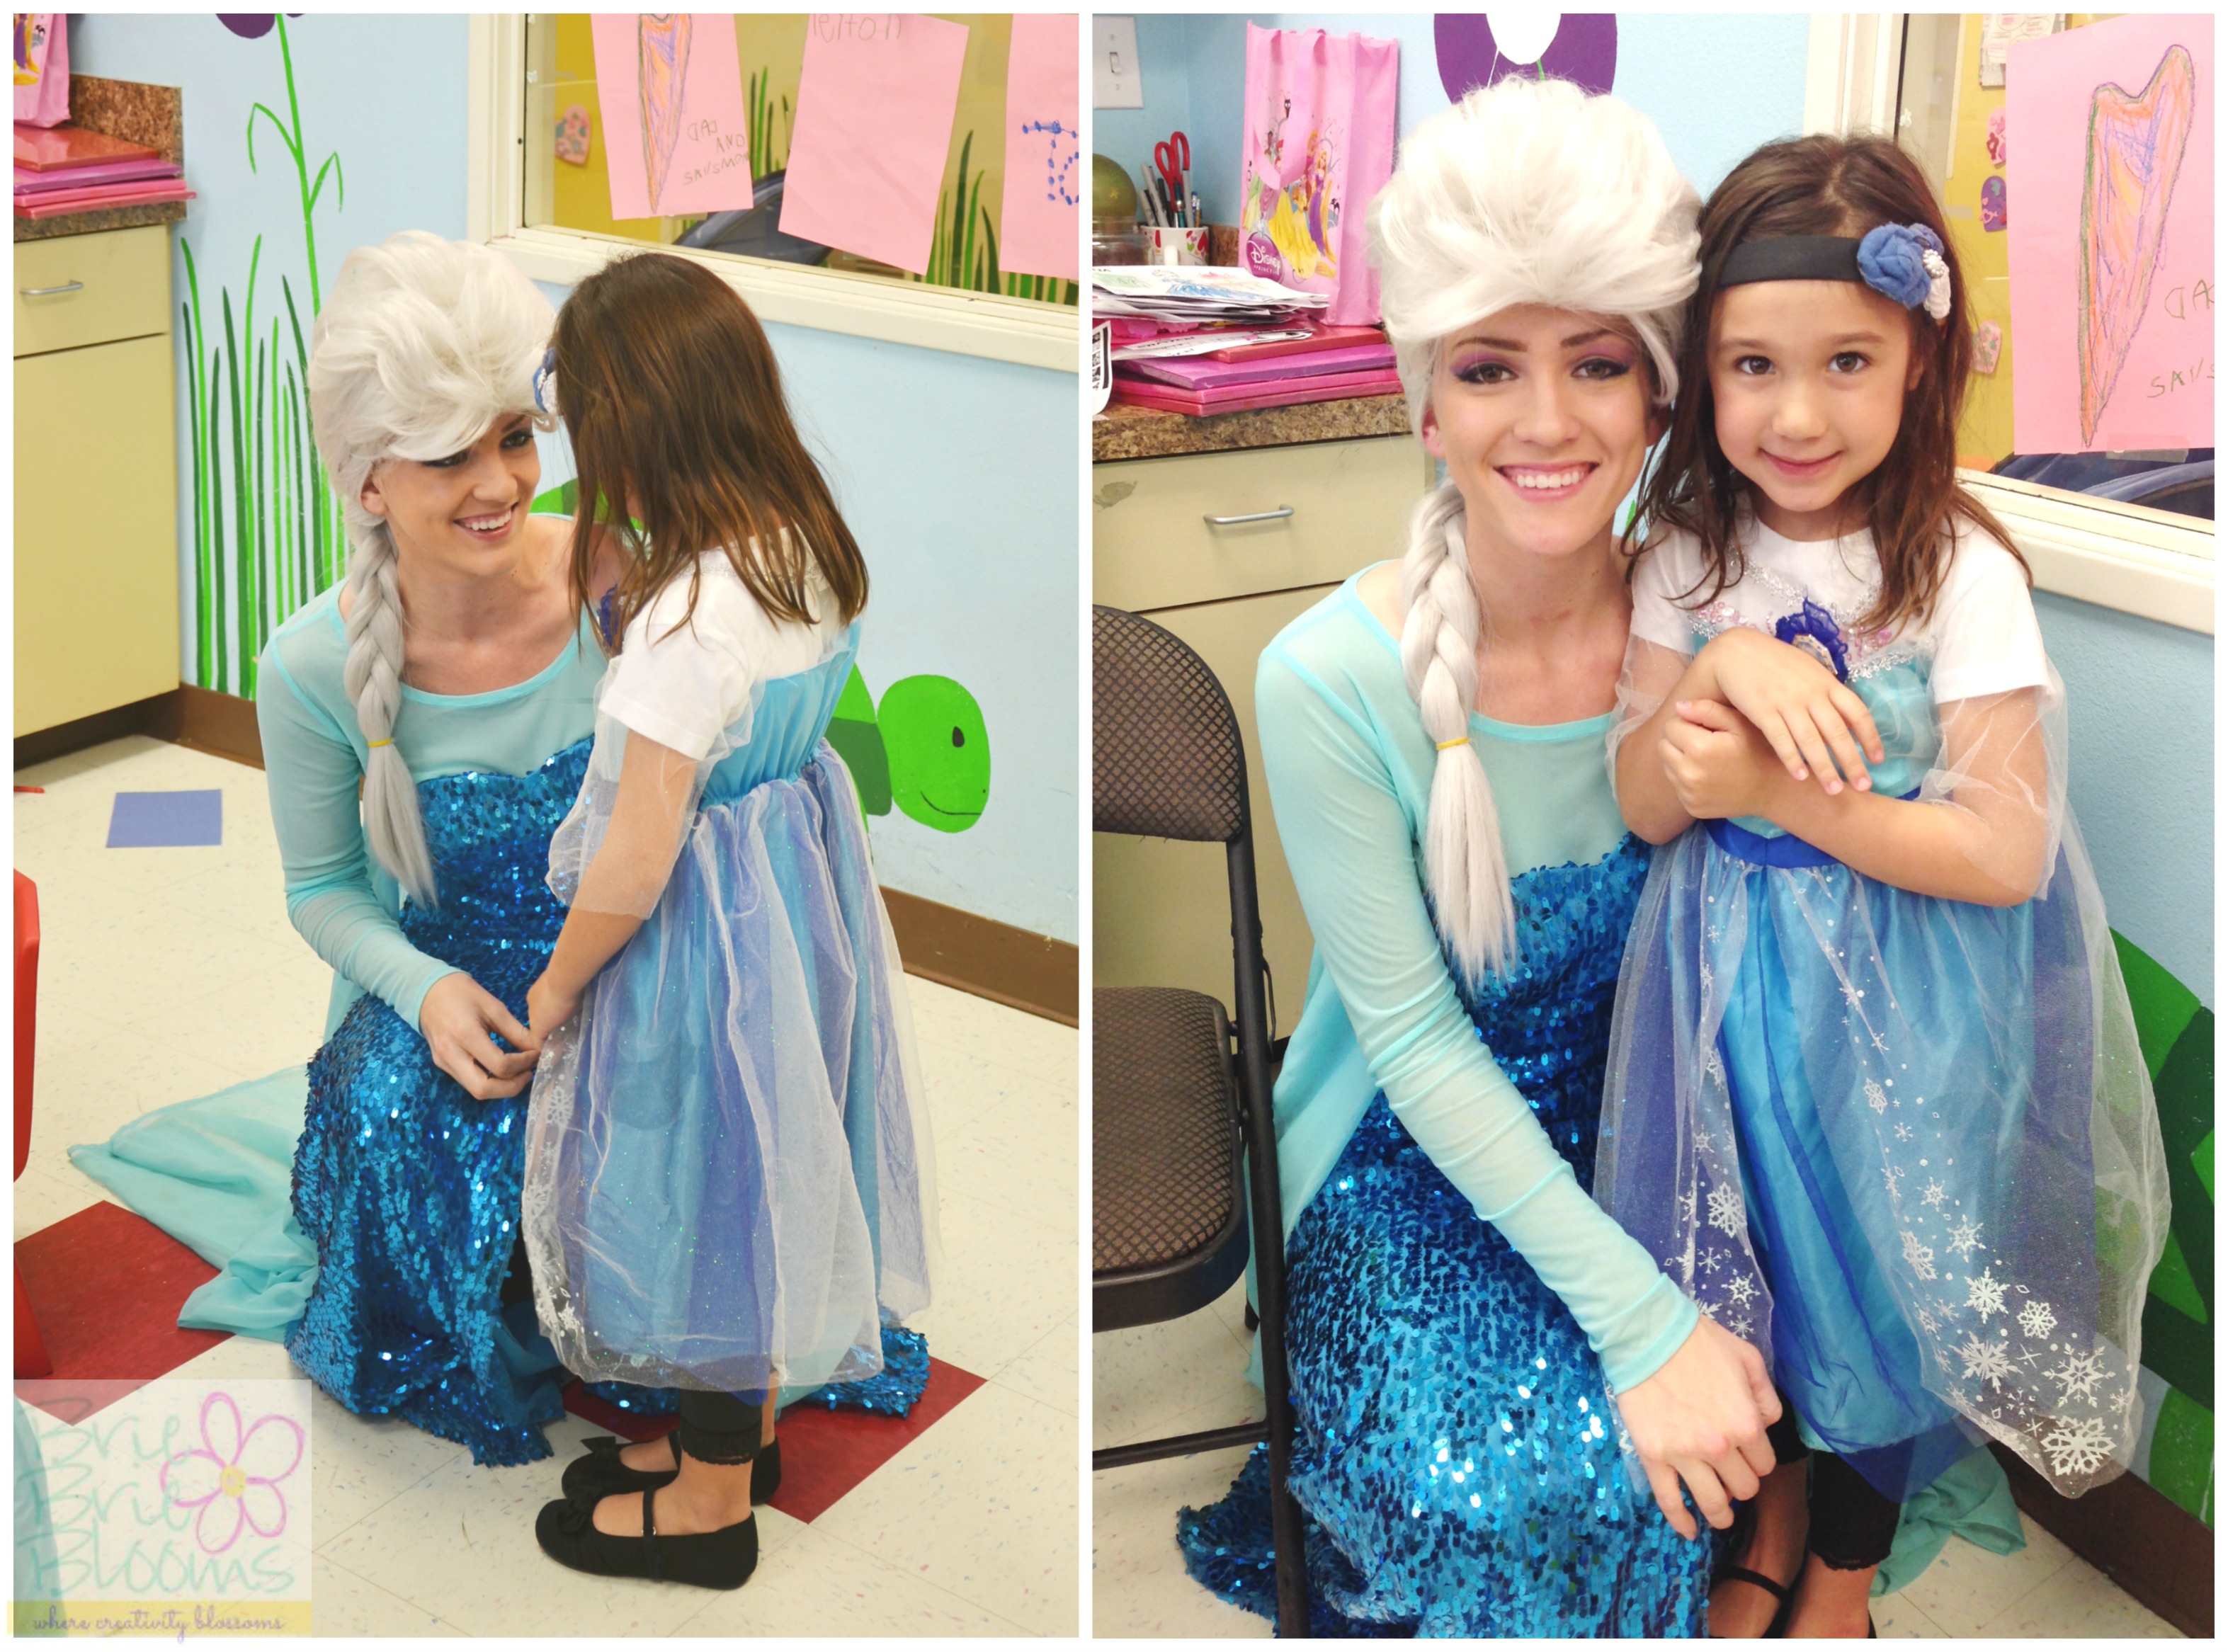 Fairytale Events princess at school Valentine's Day party